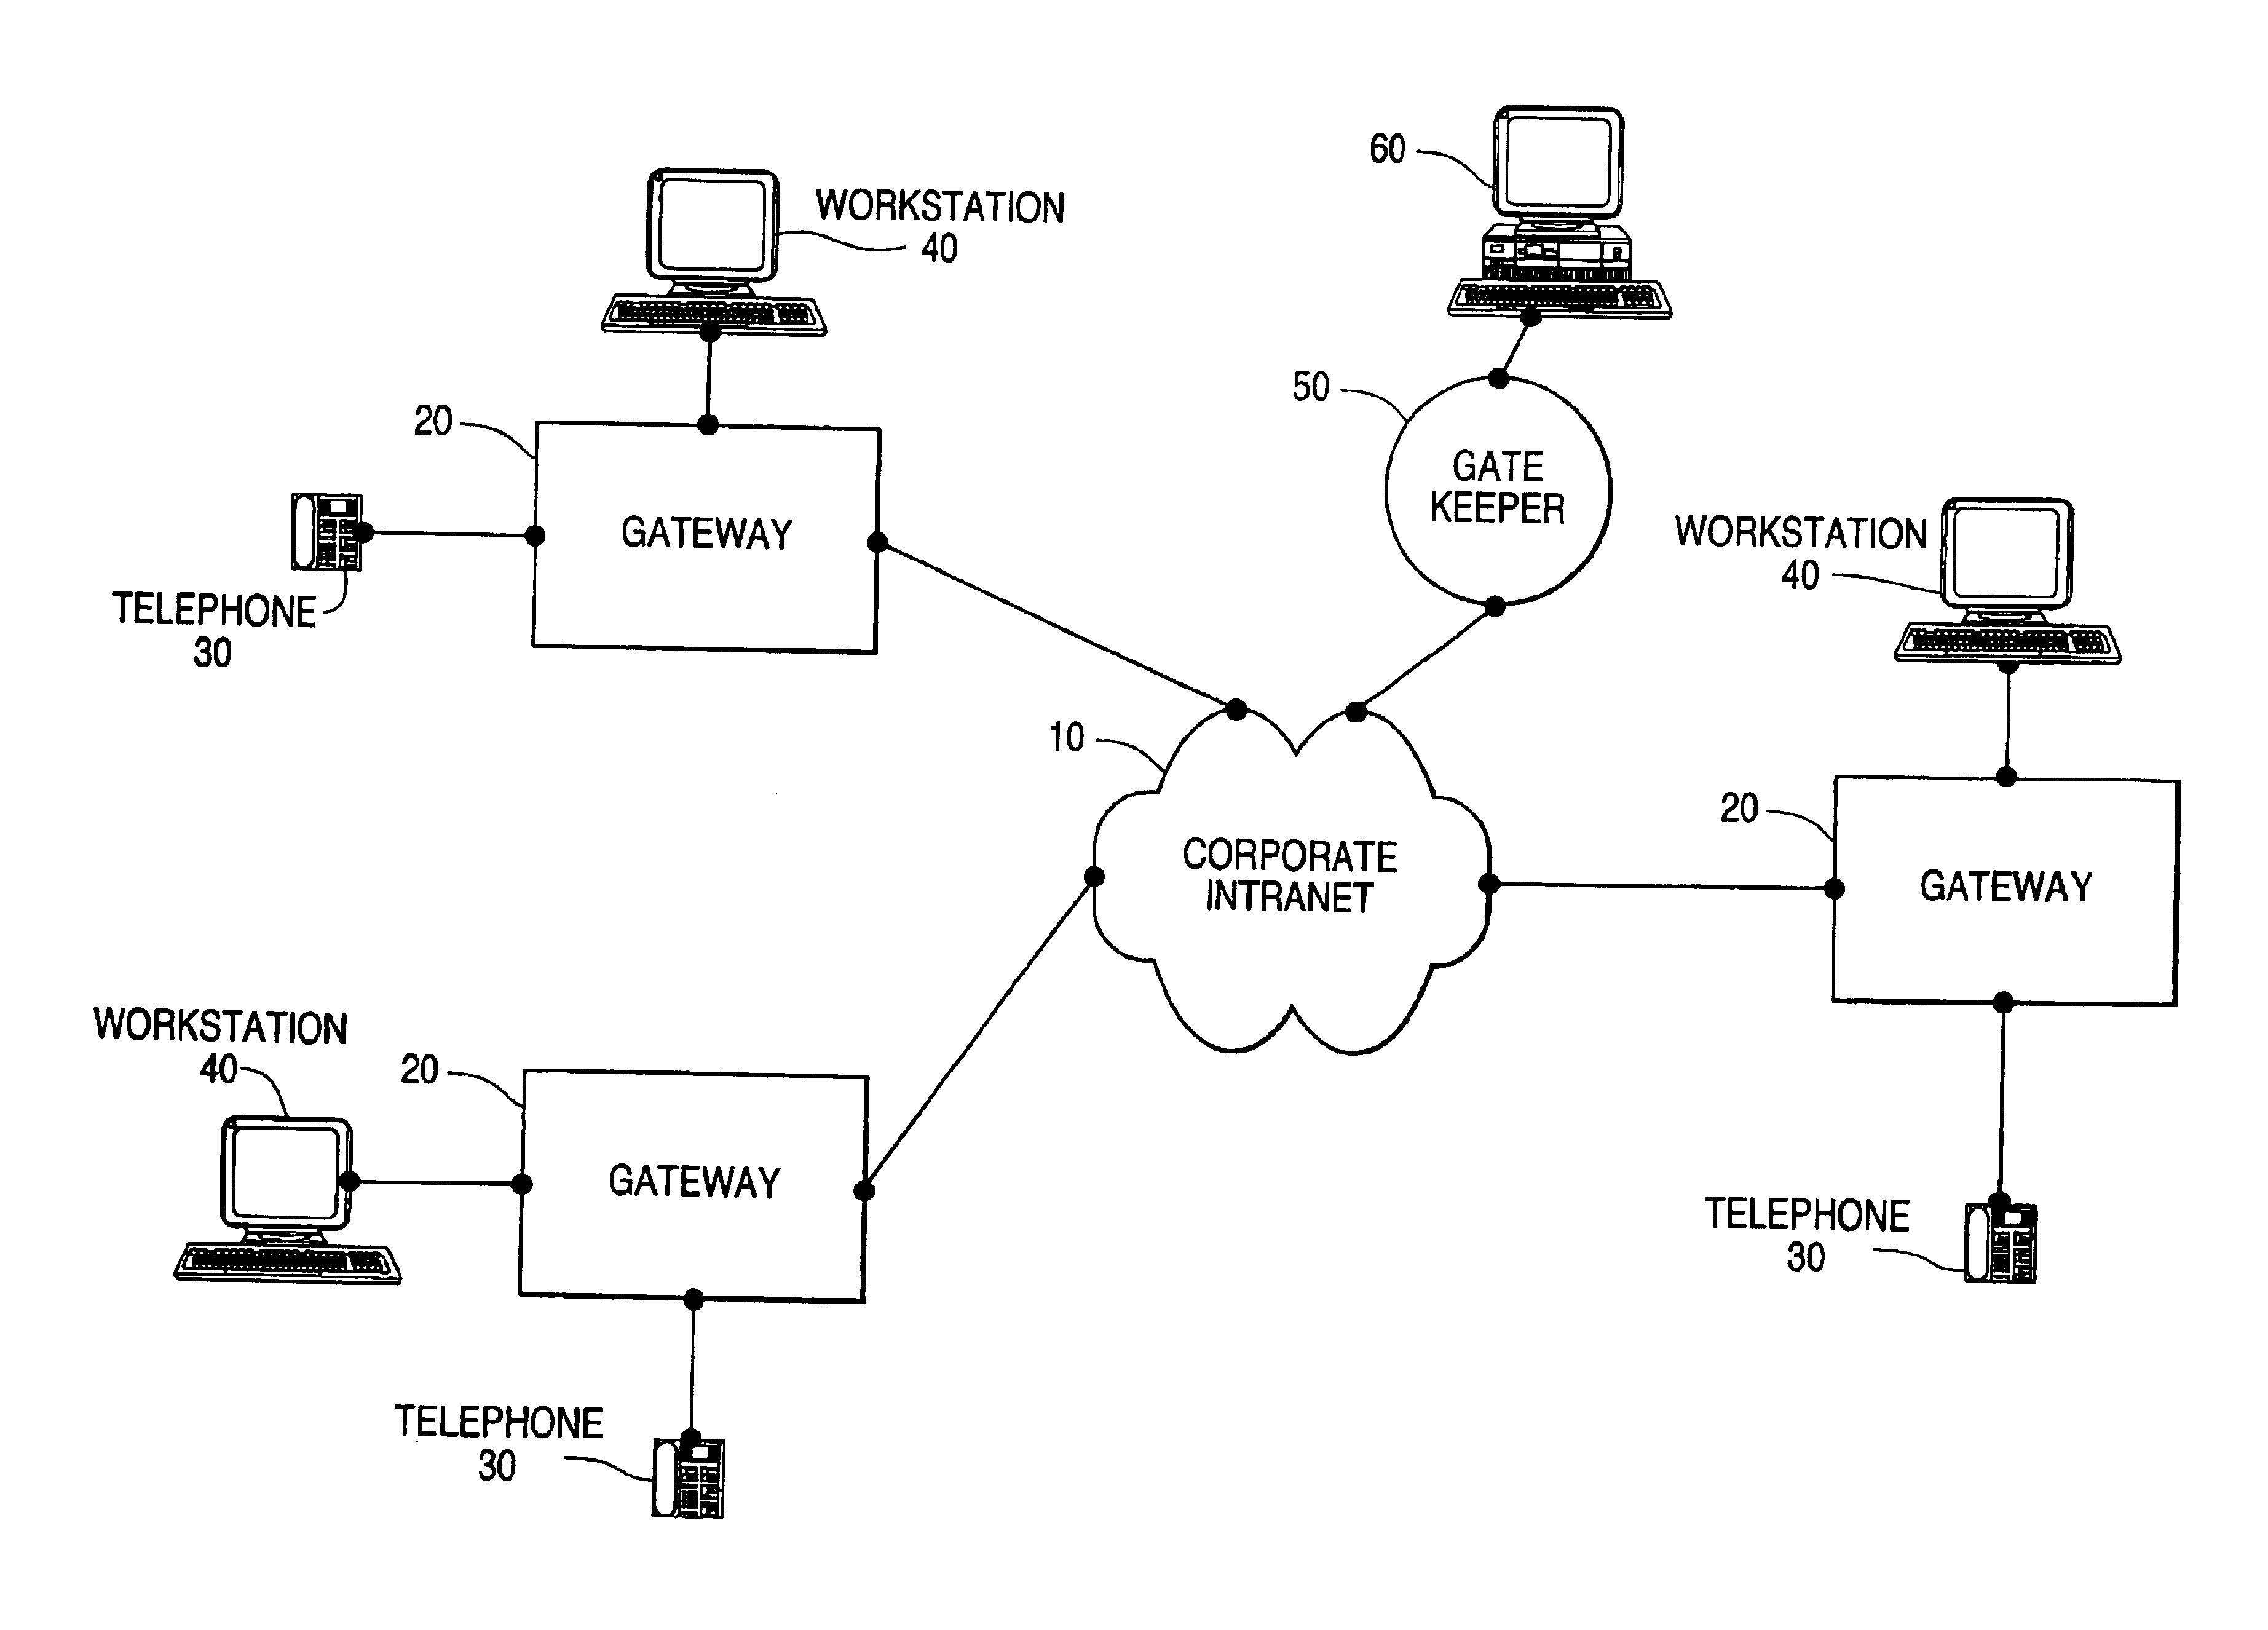 System and method for managing a network to sustain the quality of voice over internet protocol communications